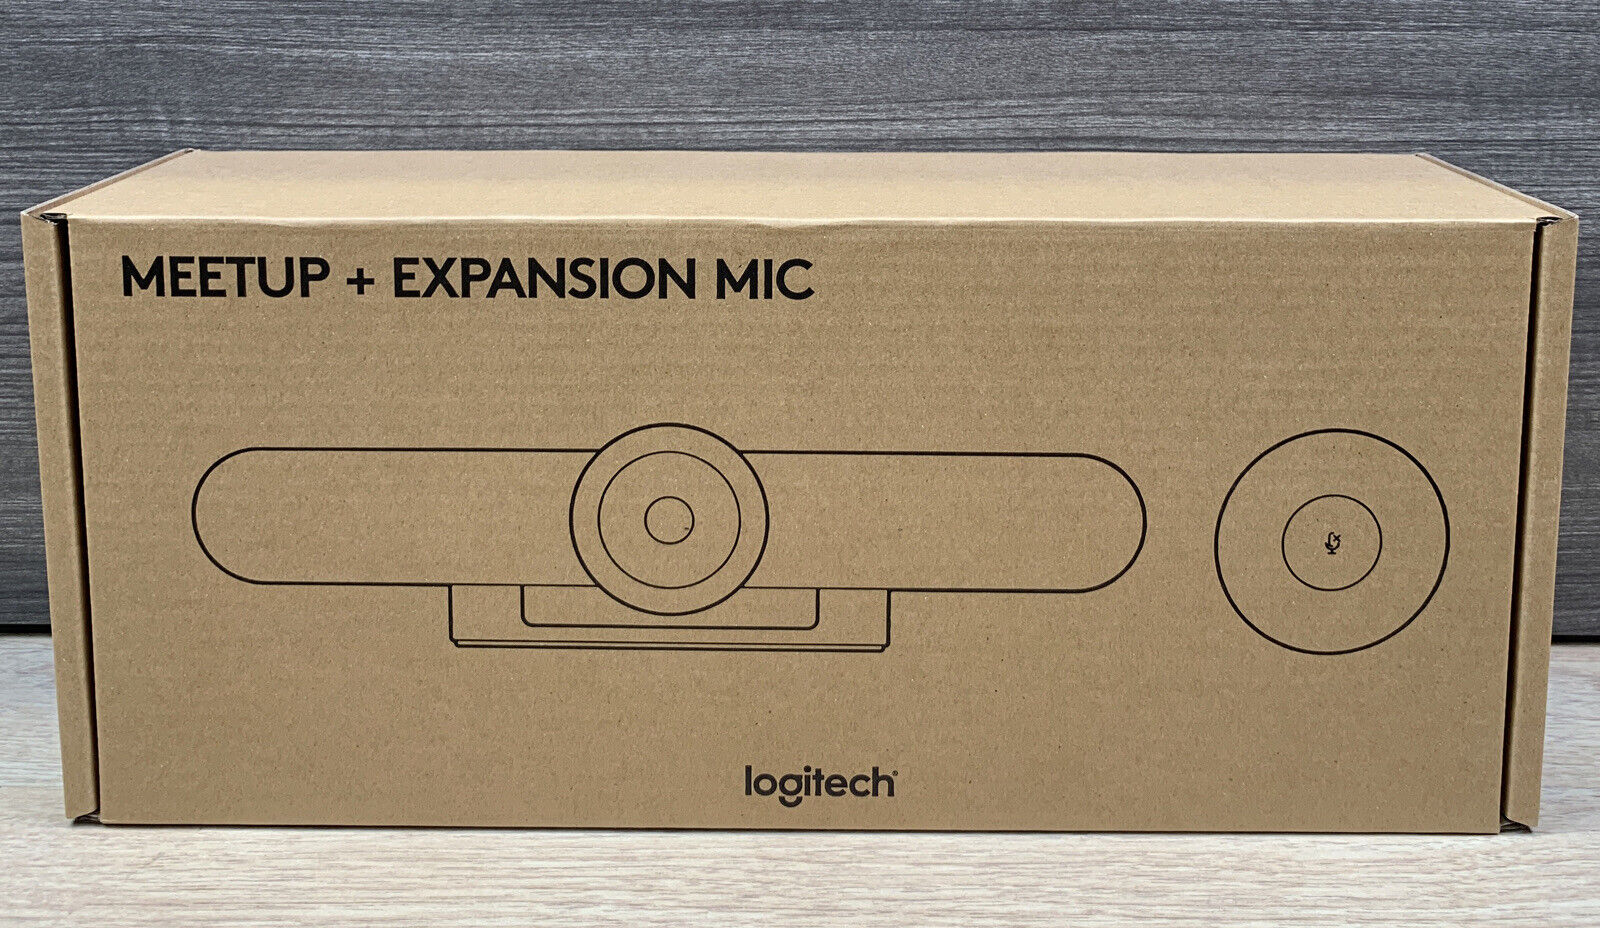 LOGITECH MEETUP 3840 X 2160 VIDEO CONFERENCING KIT W/ EXPANSION MIC 960-001201